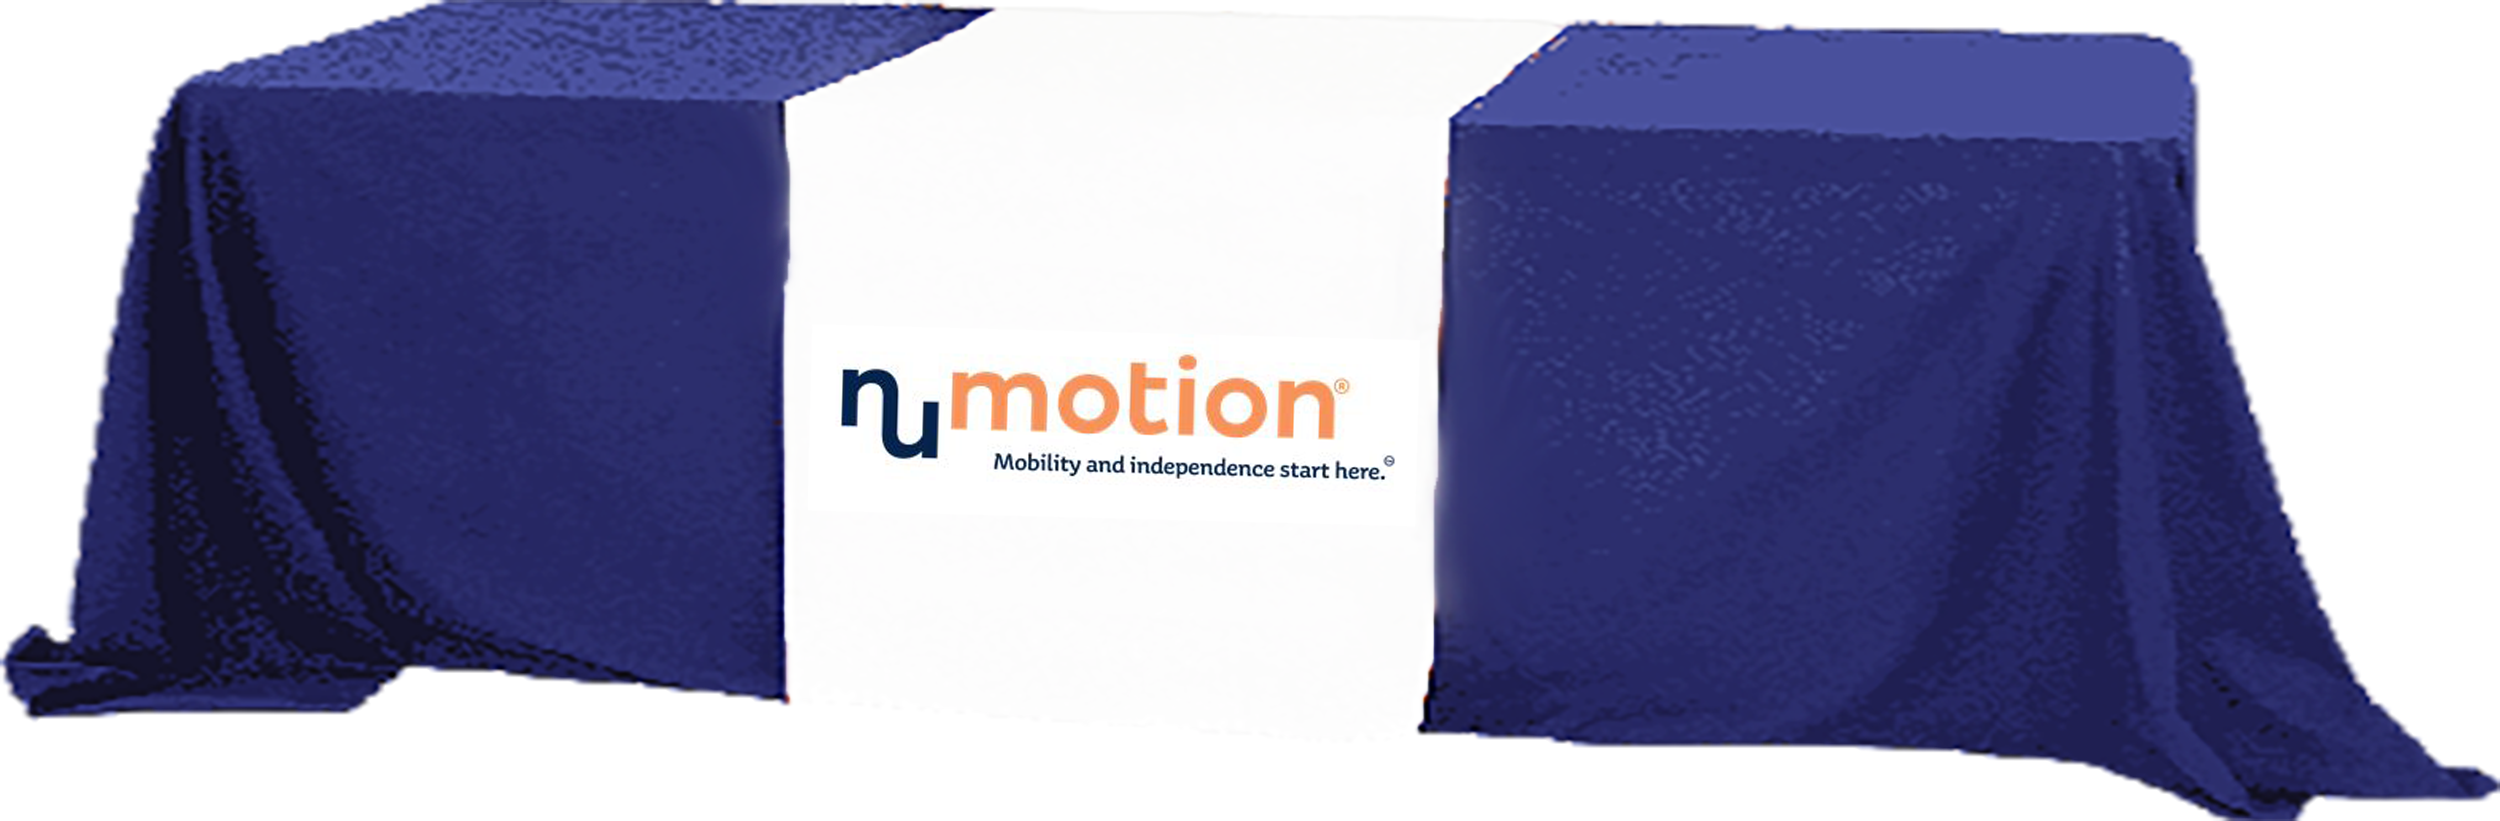 Numotion logo on a table cover over a table image